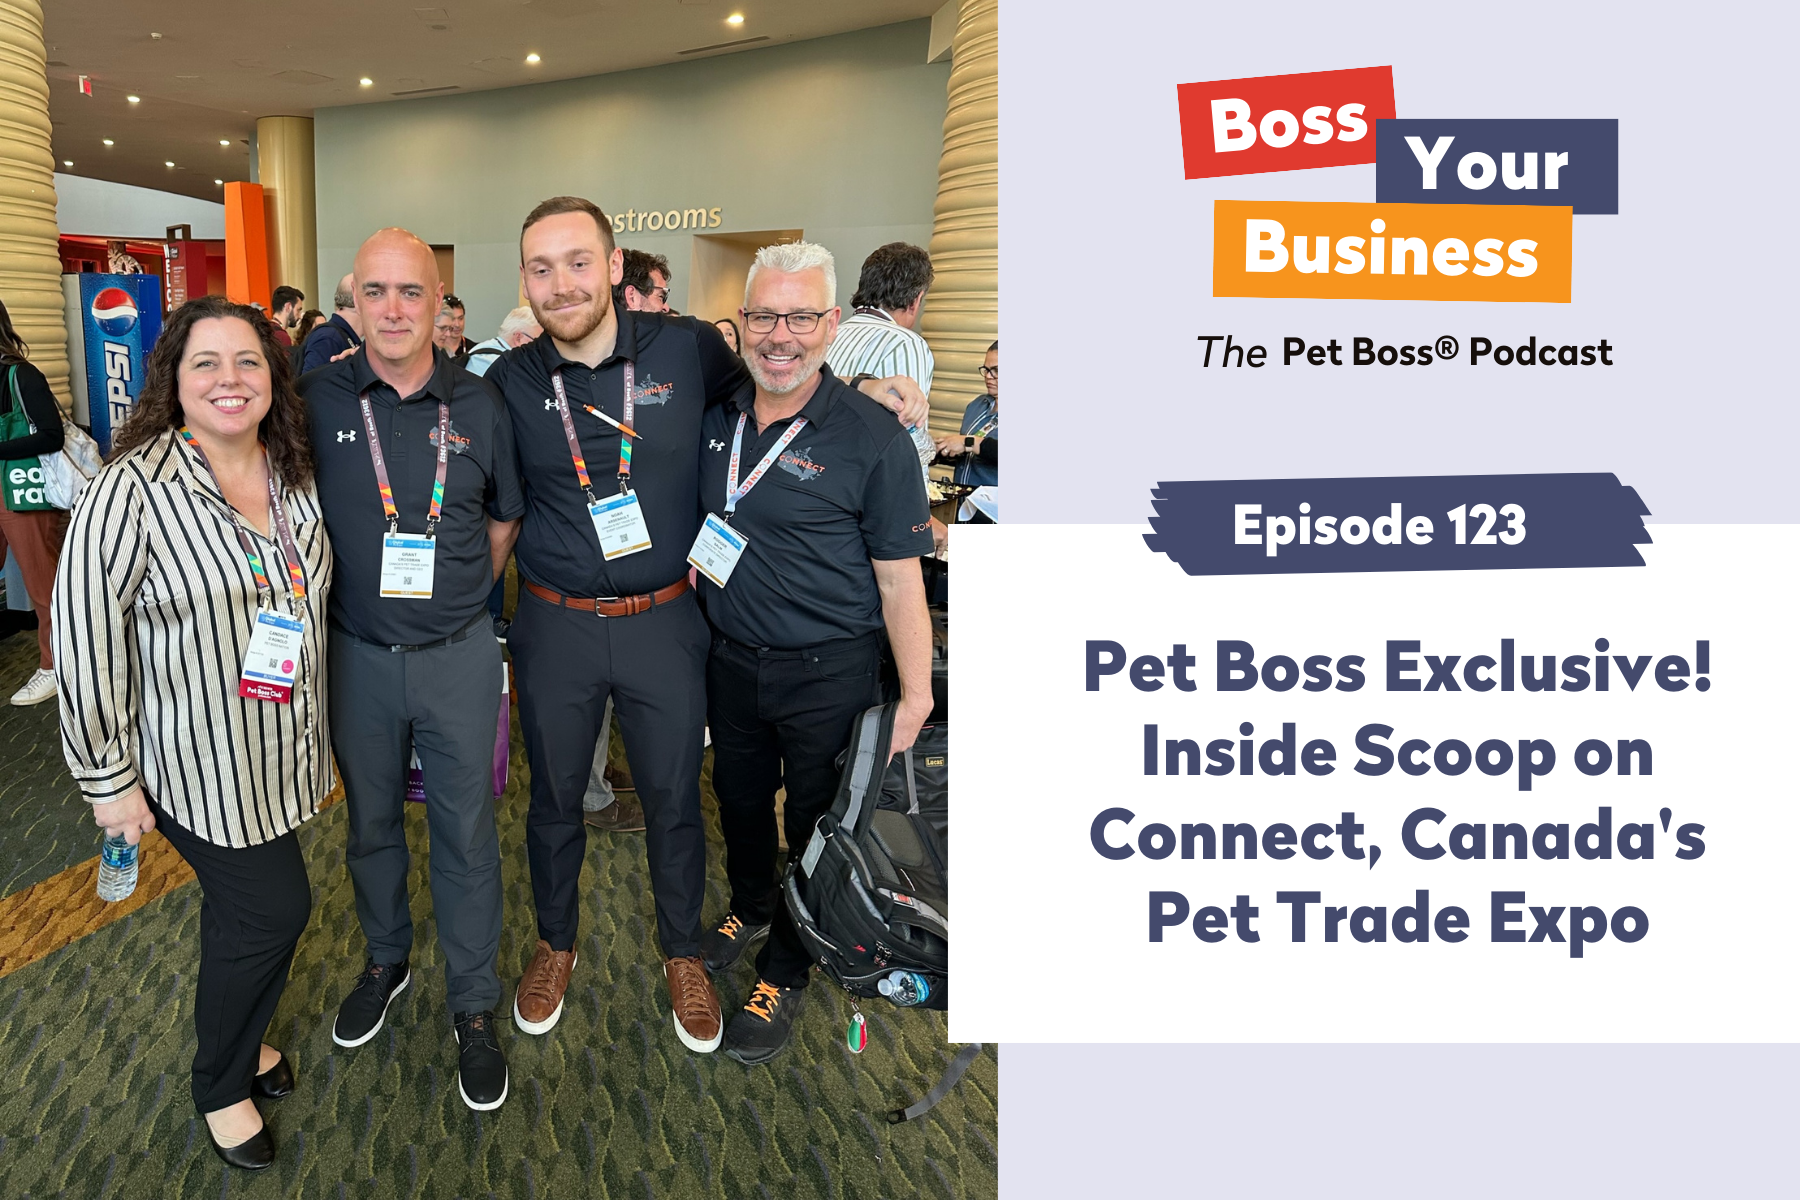 Pet Boss Nation Boss Your Business Podcast Episode 123 Pet Boss Exclusive! Inside Scoop on Connect, Canada's Pet Trade Expo